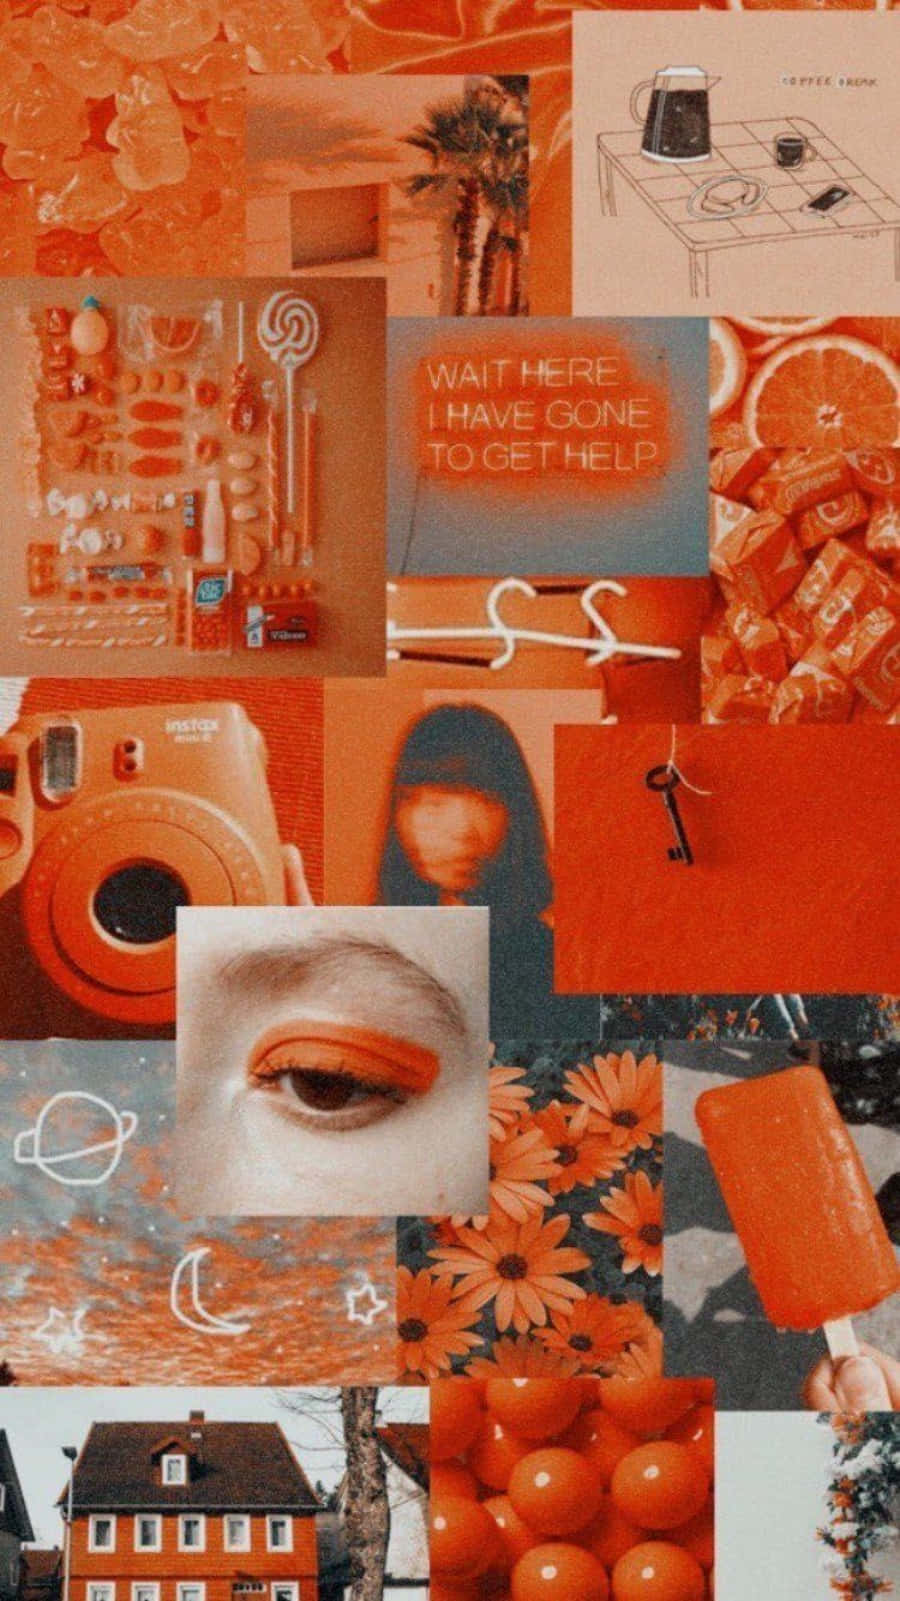 Let the beauty of the orange aesthetic rejuvenate and inspire you